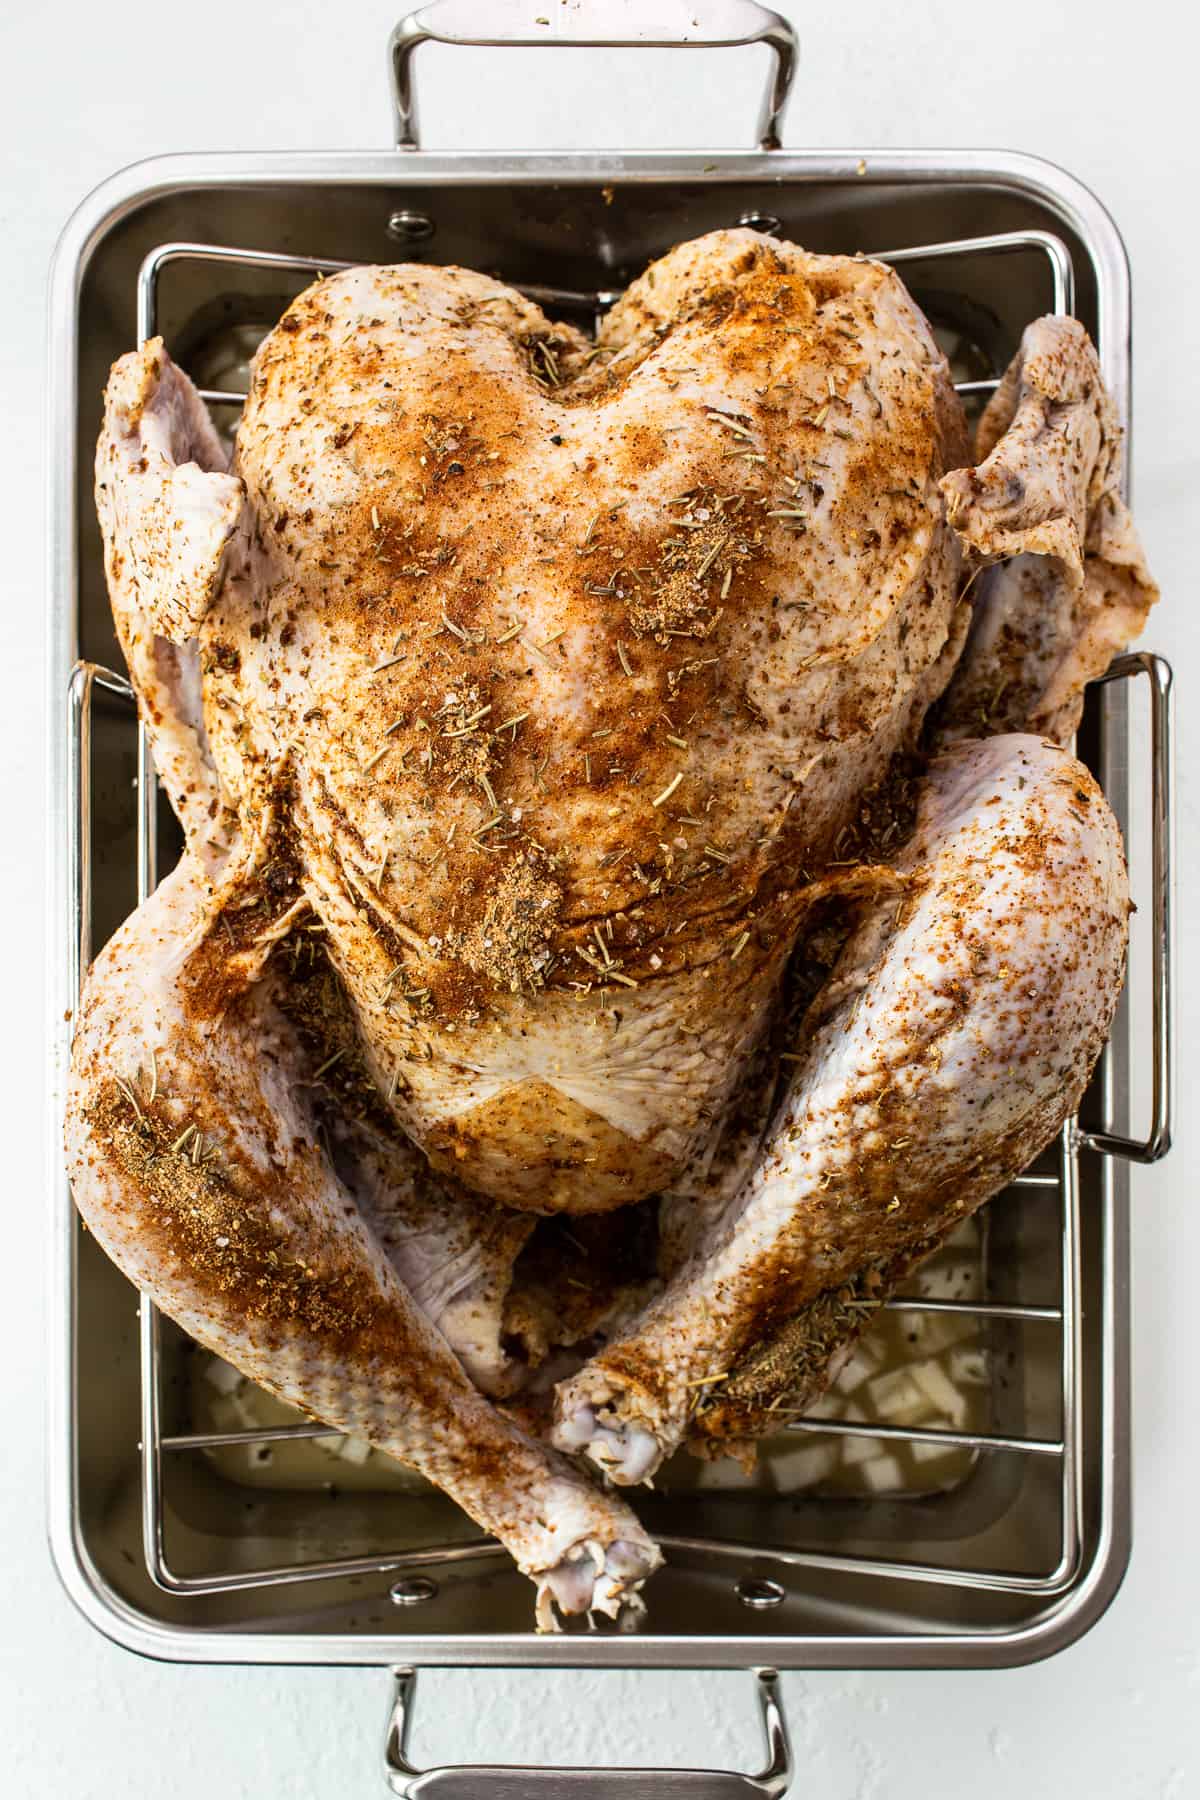 A whole turkey with dry rub and sitting in a roasting pan TeamJiX